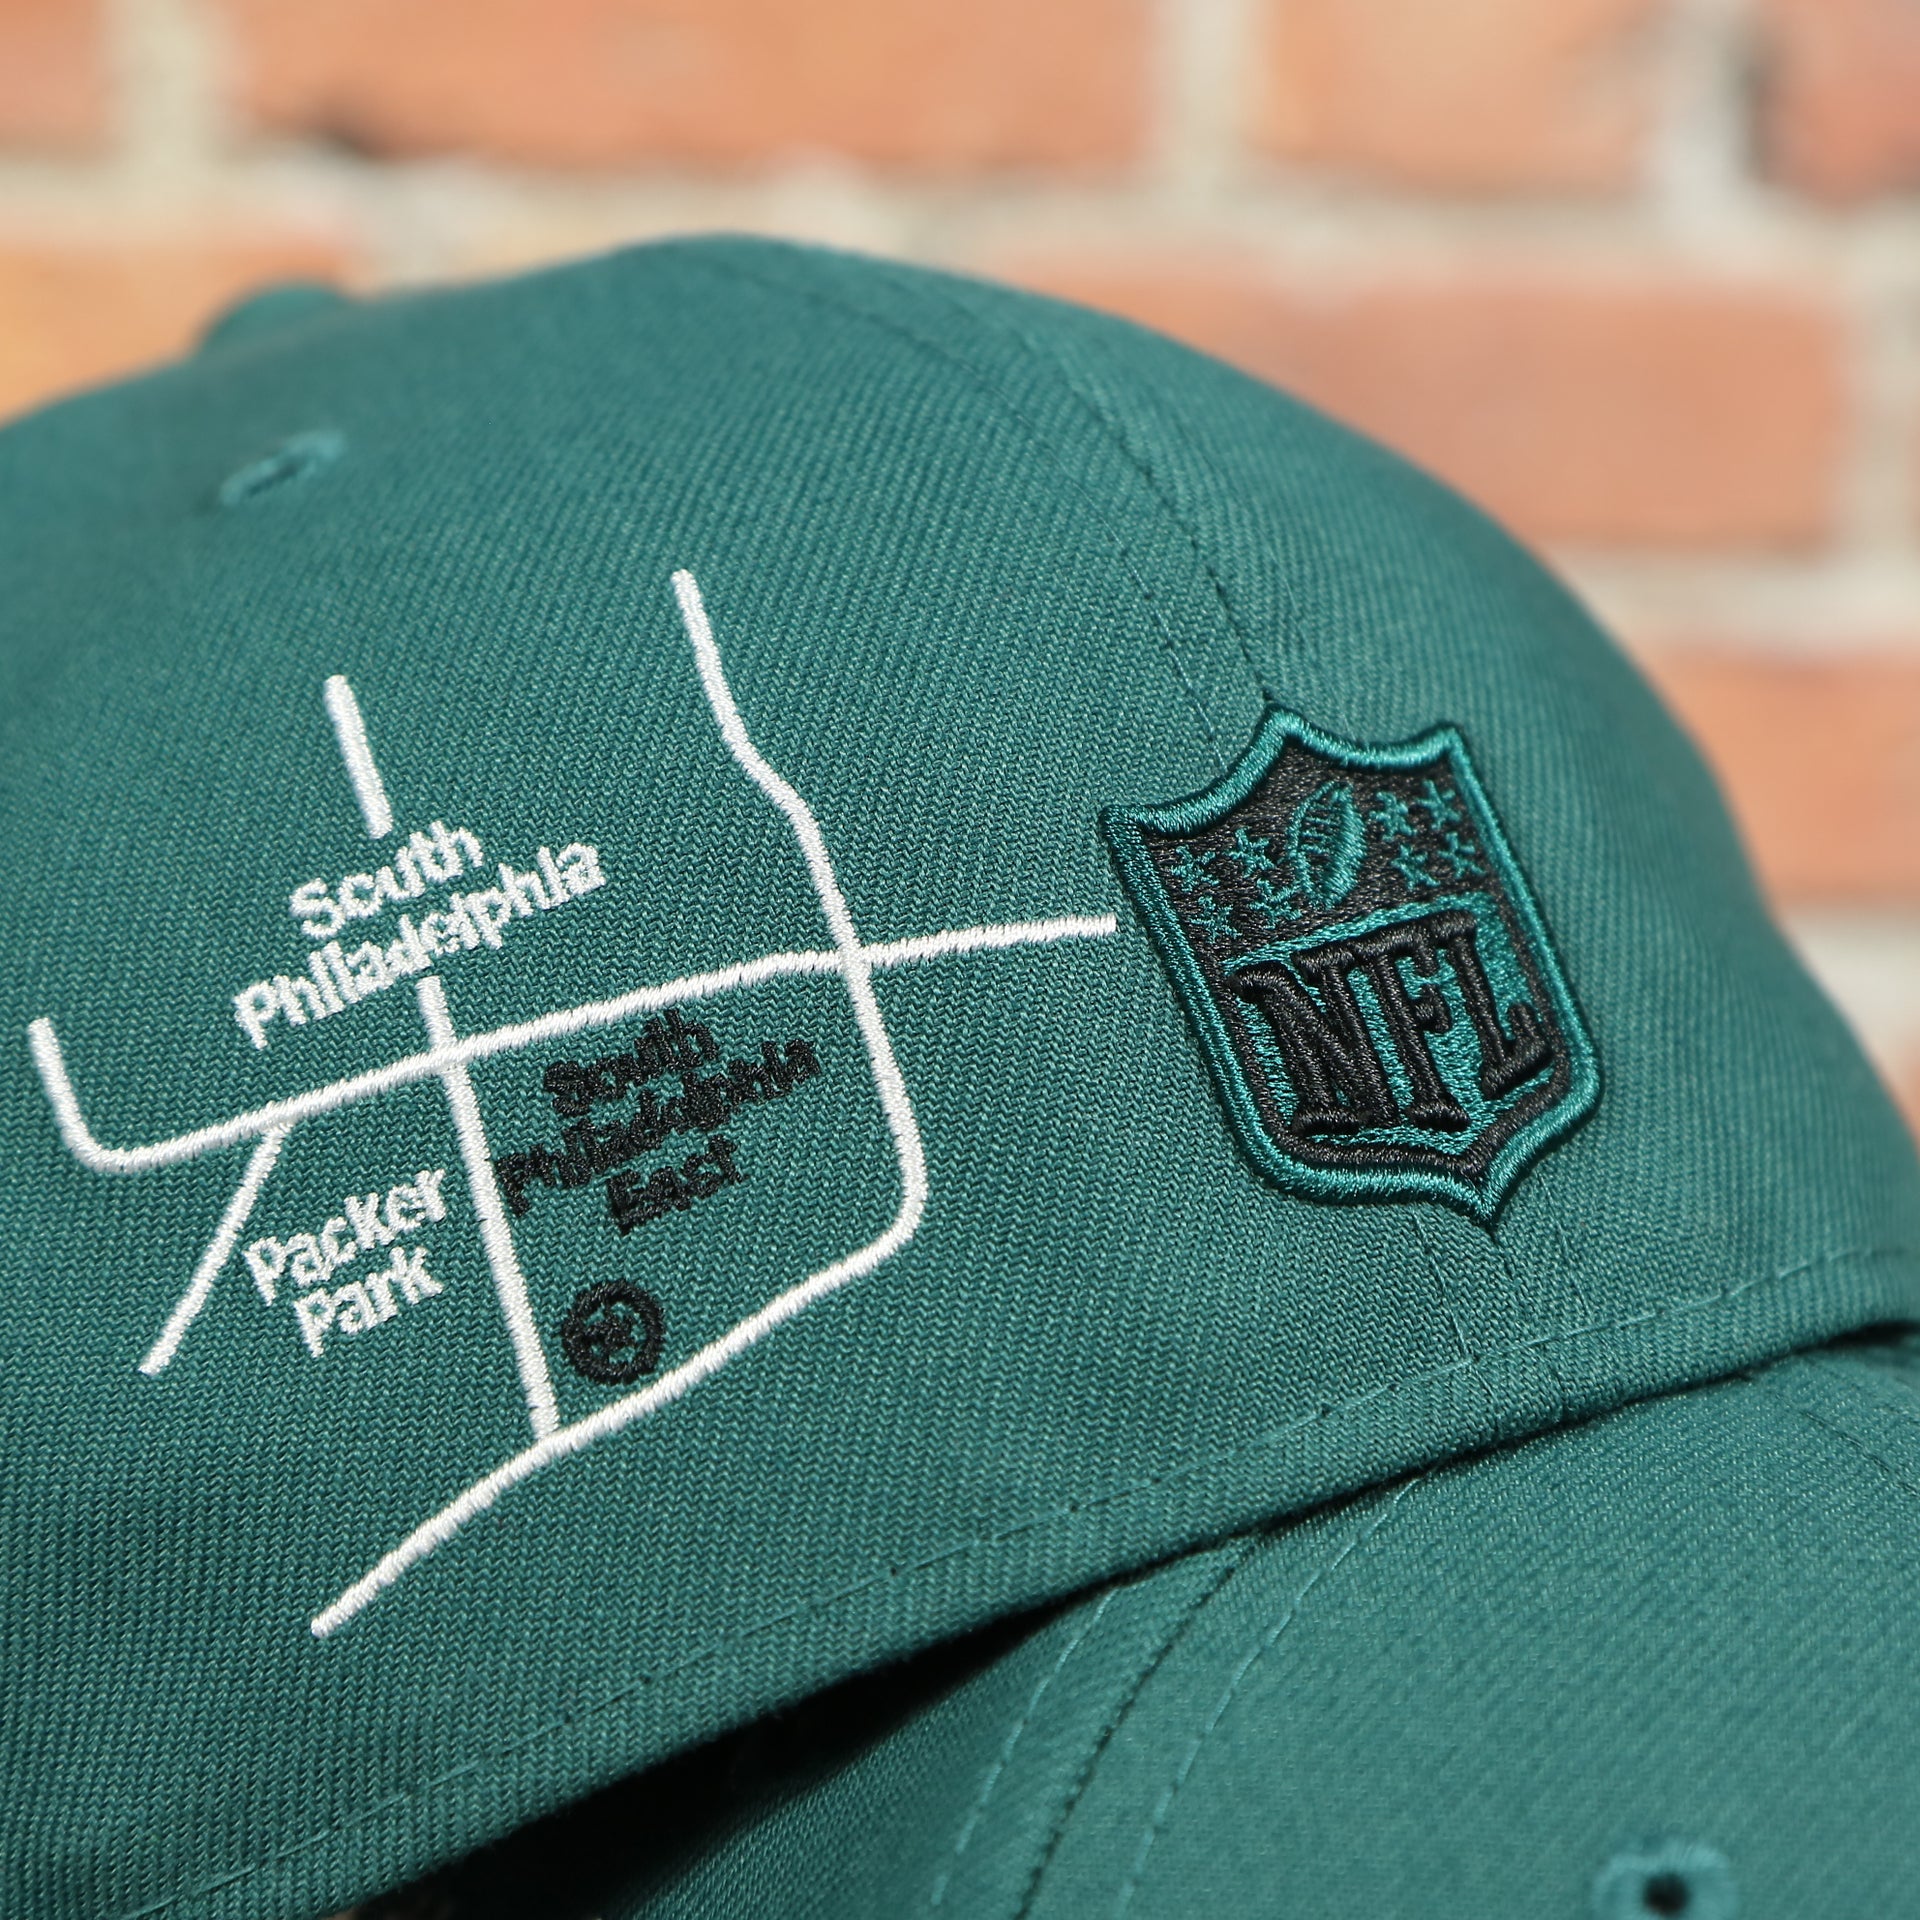 South Philadelphia East and NFL logo on the Philadelphia Eagles City Transit All Over Side Patch Gray Bottom 59Fifty Fitted Cap